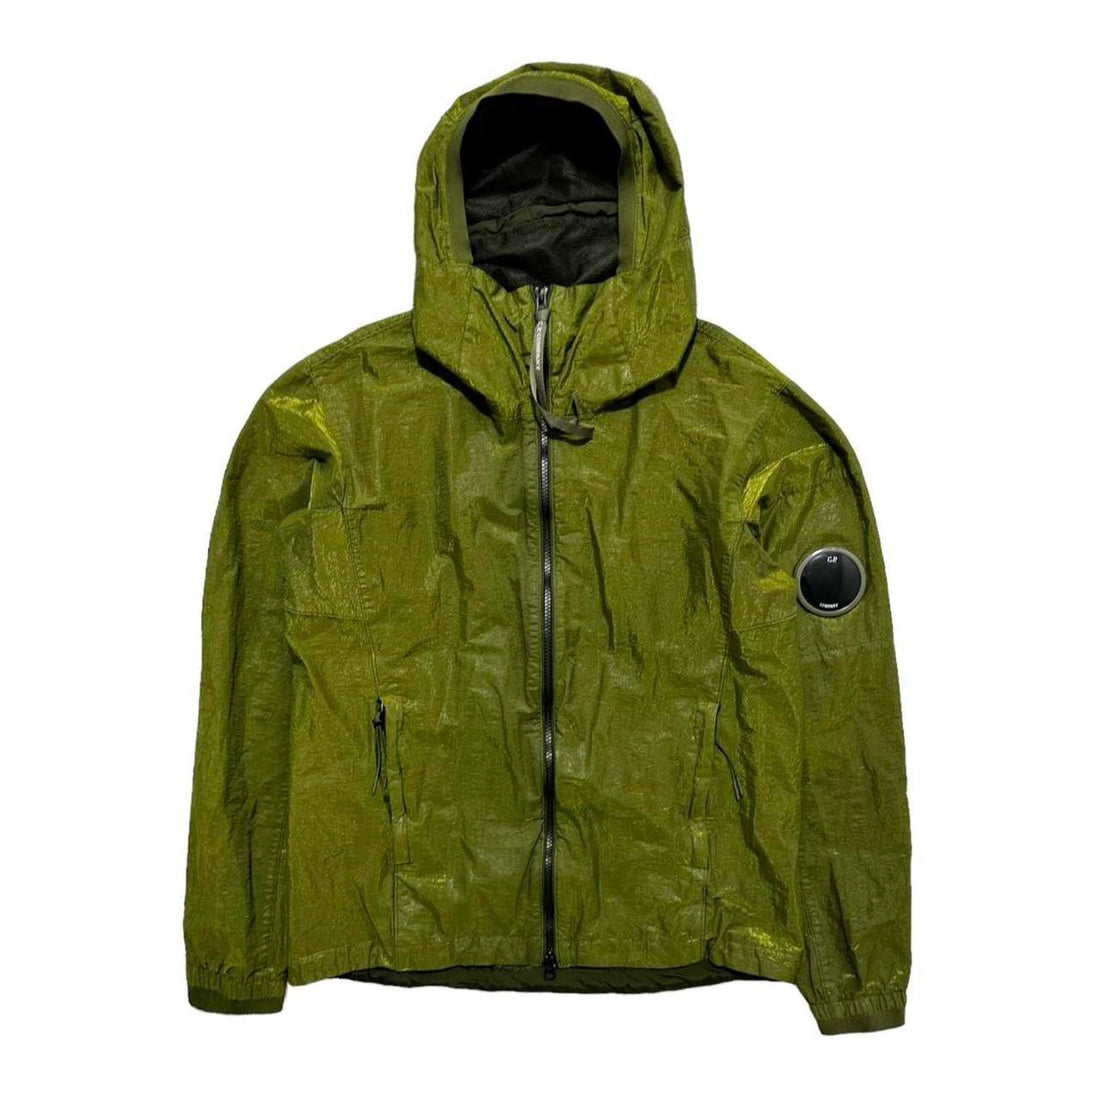 CP Company green prism jacket